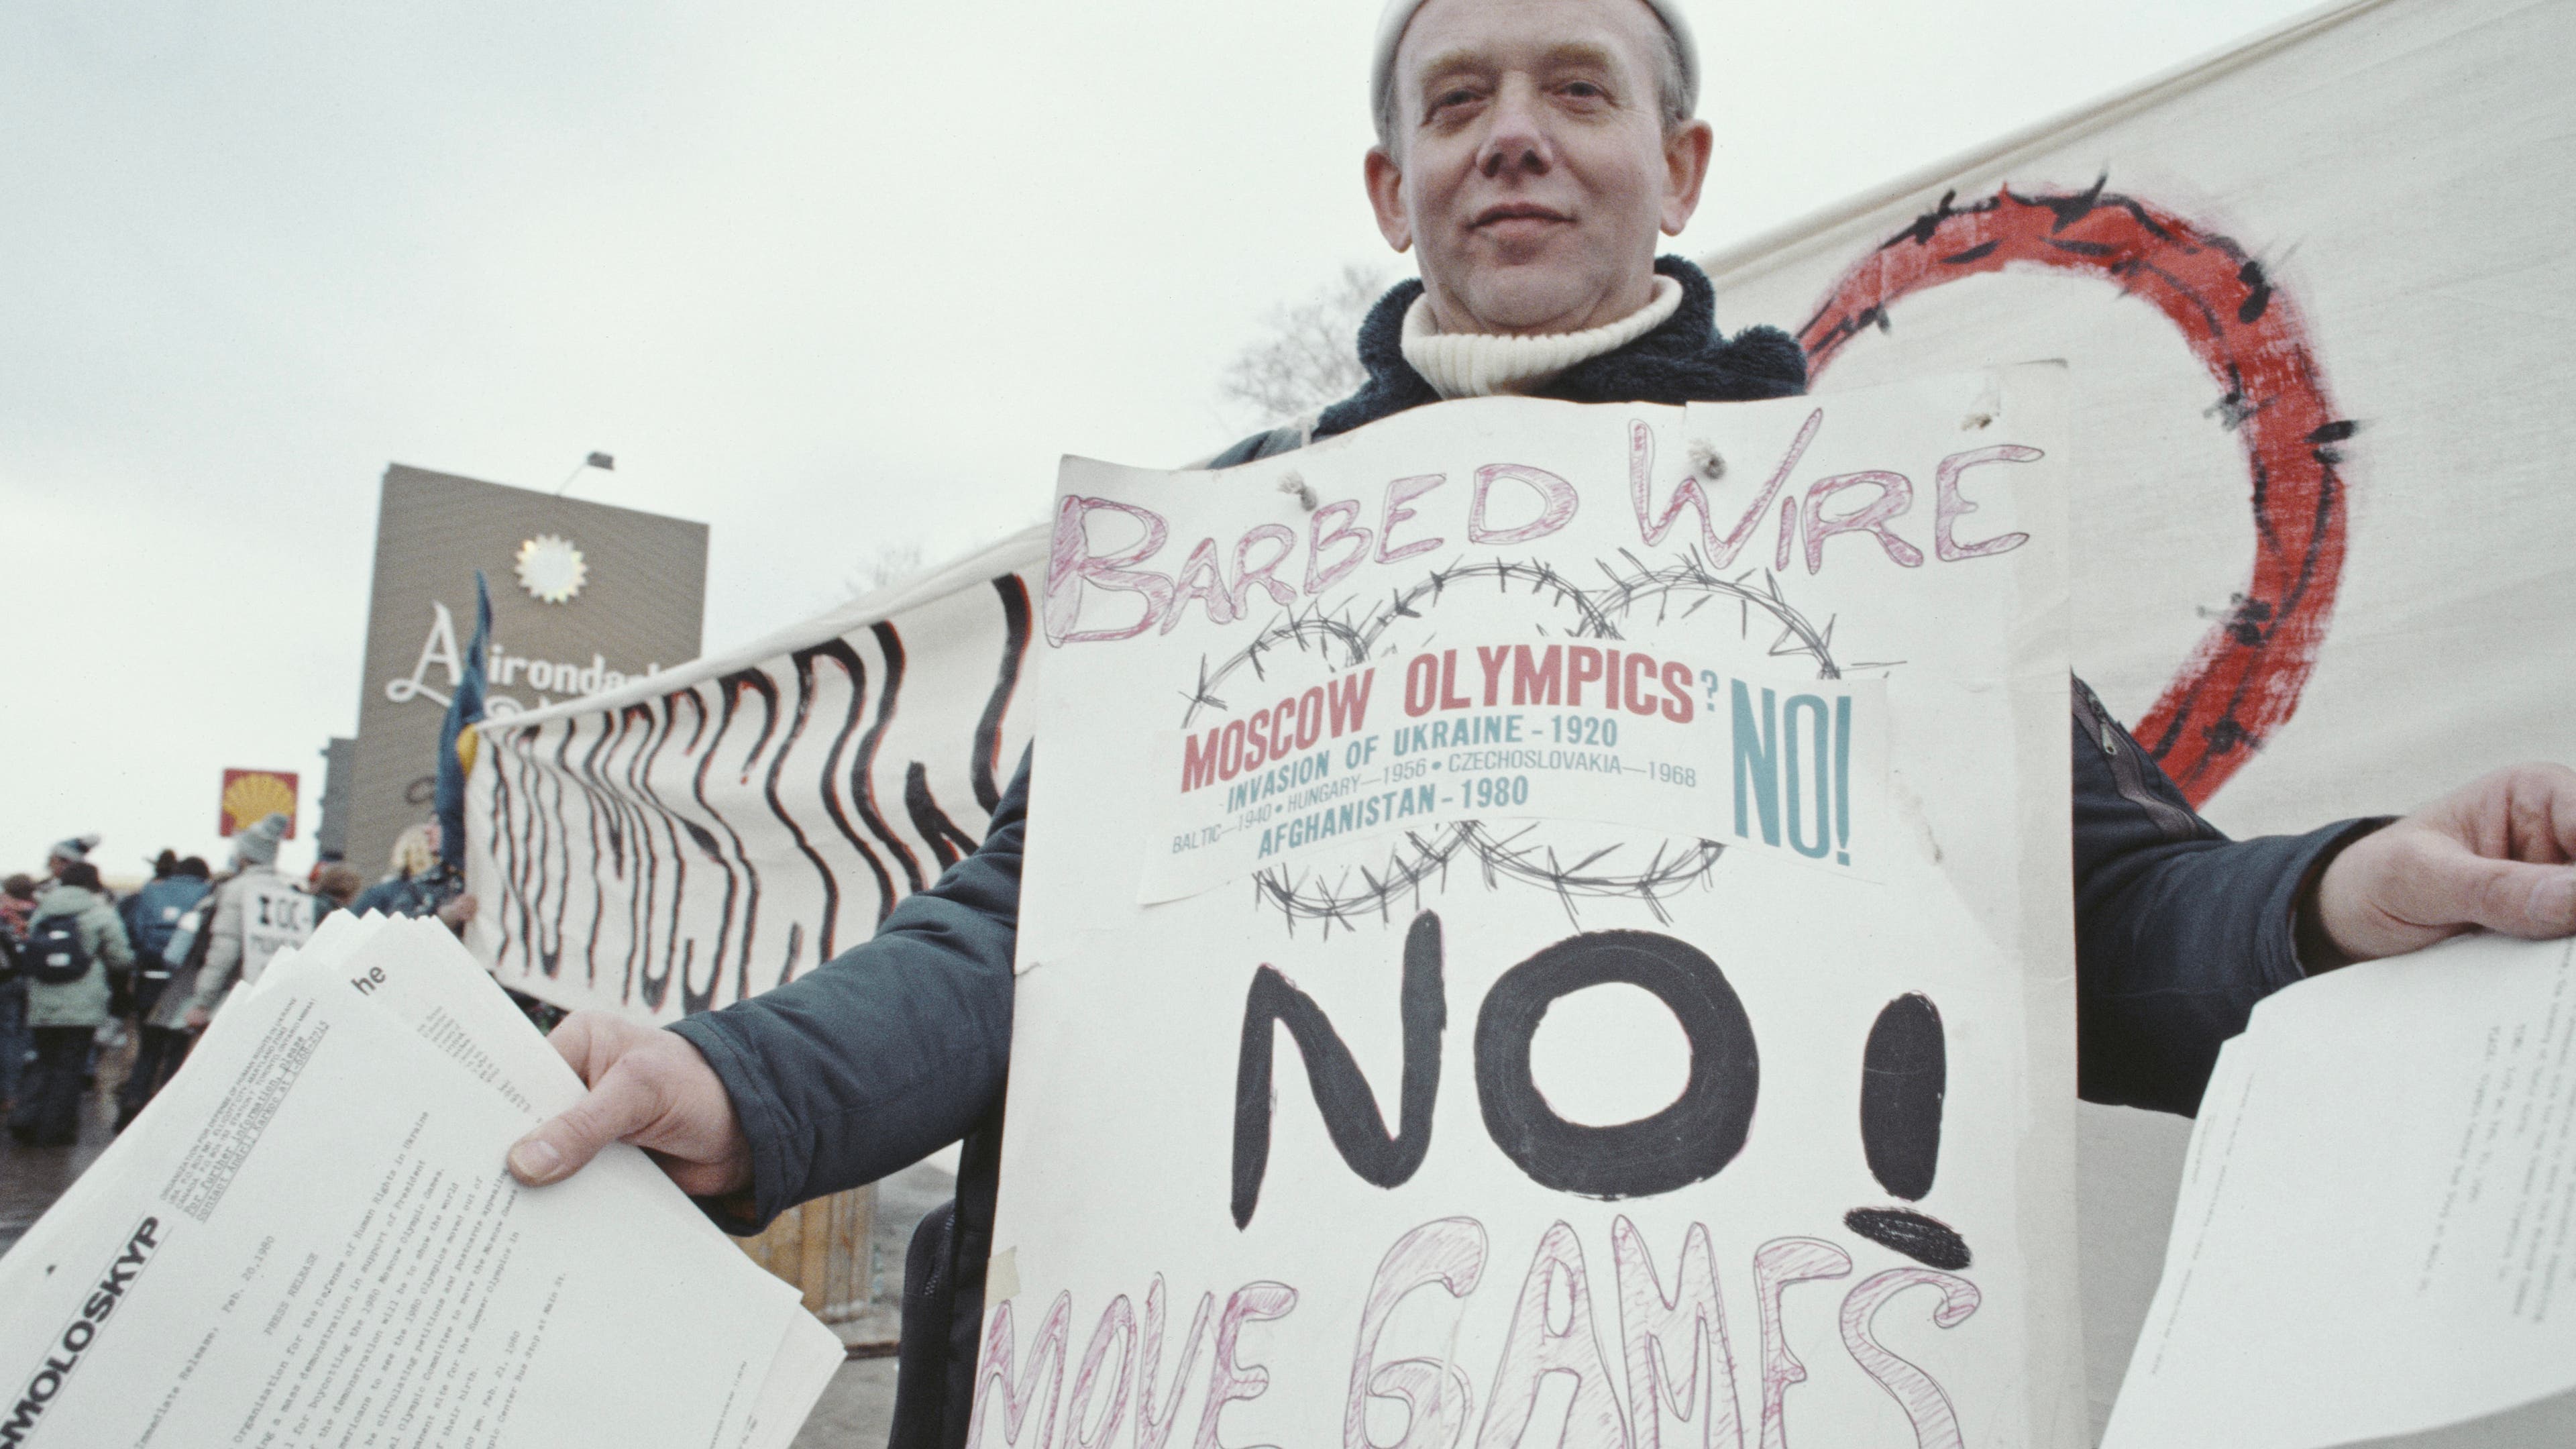 A protester against the Moscow summer Olympics, on February 14, 1980 in Lake Placid, New York.